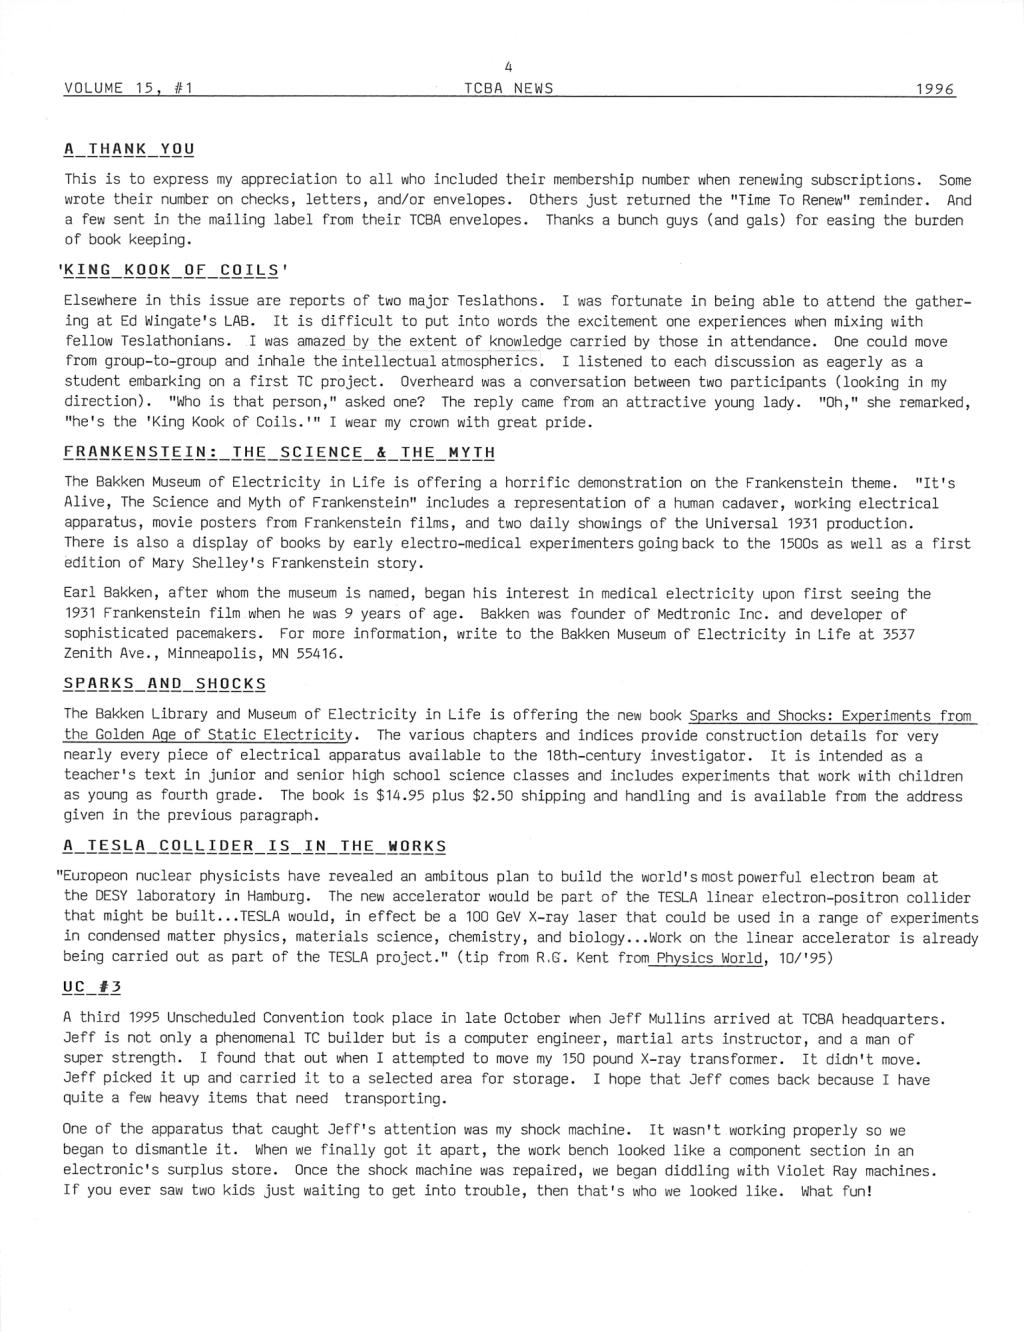 TCBA Volume 15 - Issue 1 - Page 4 of 18